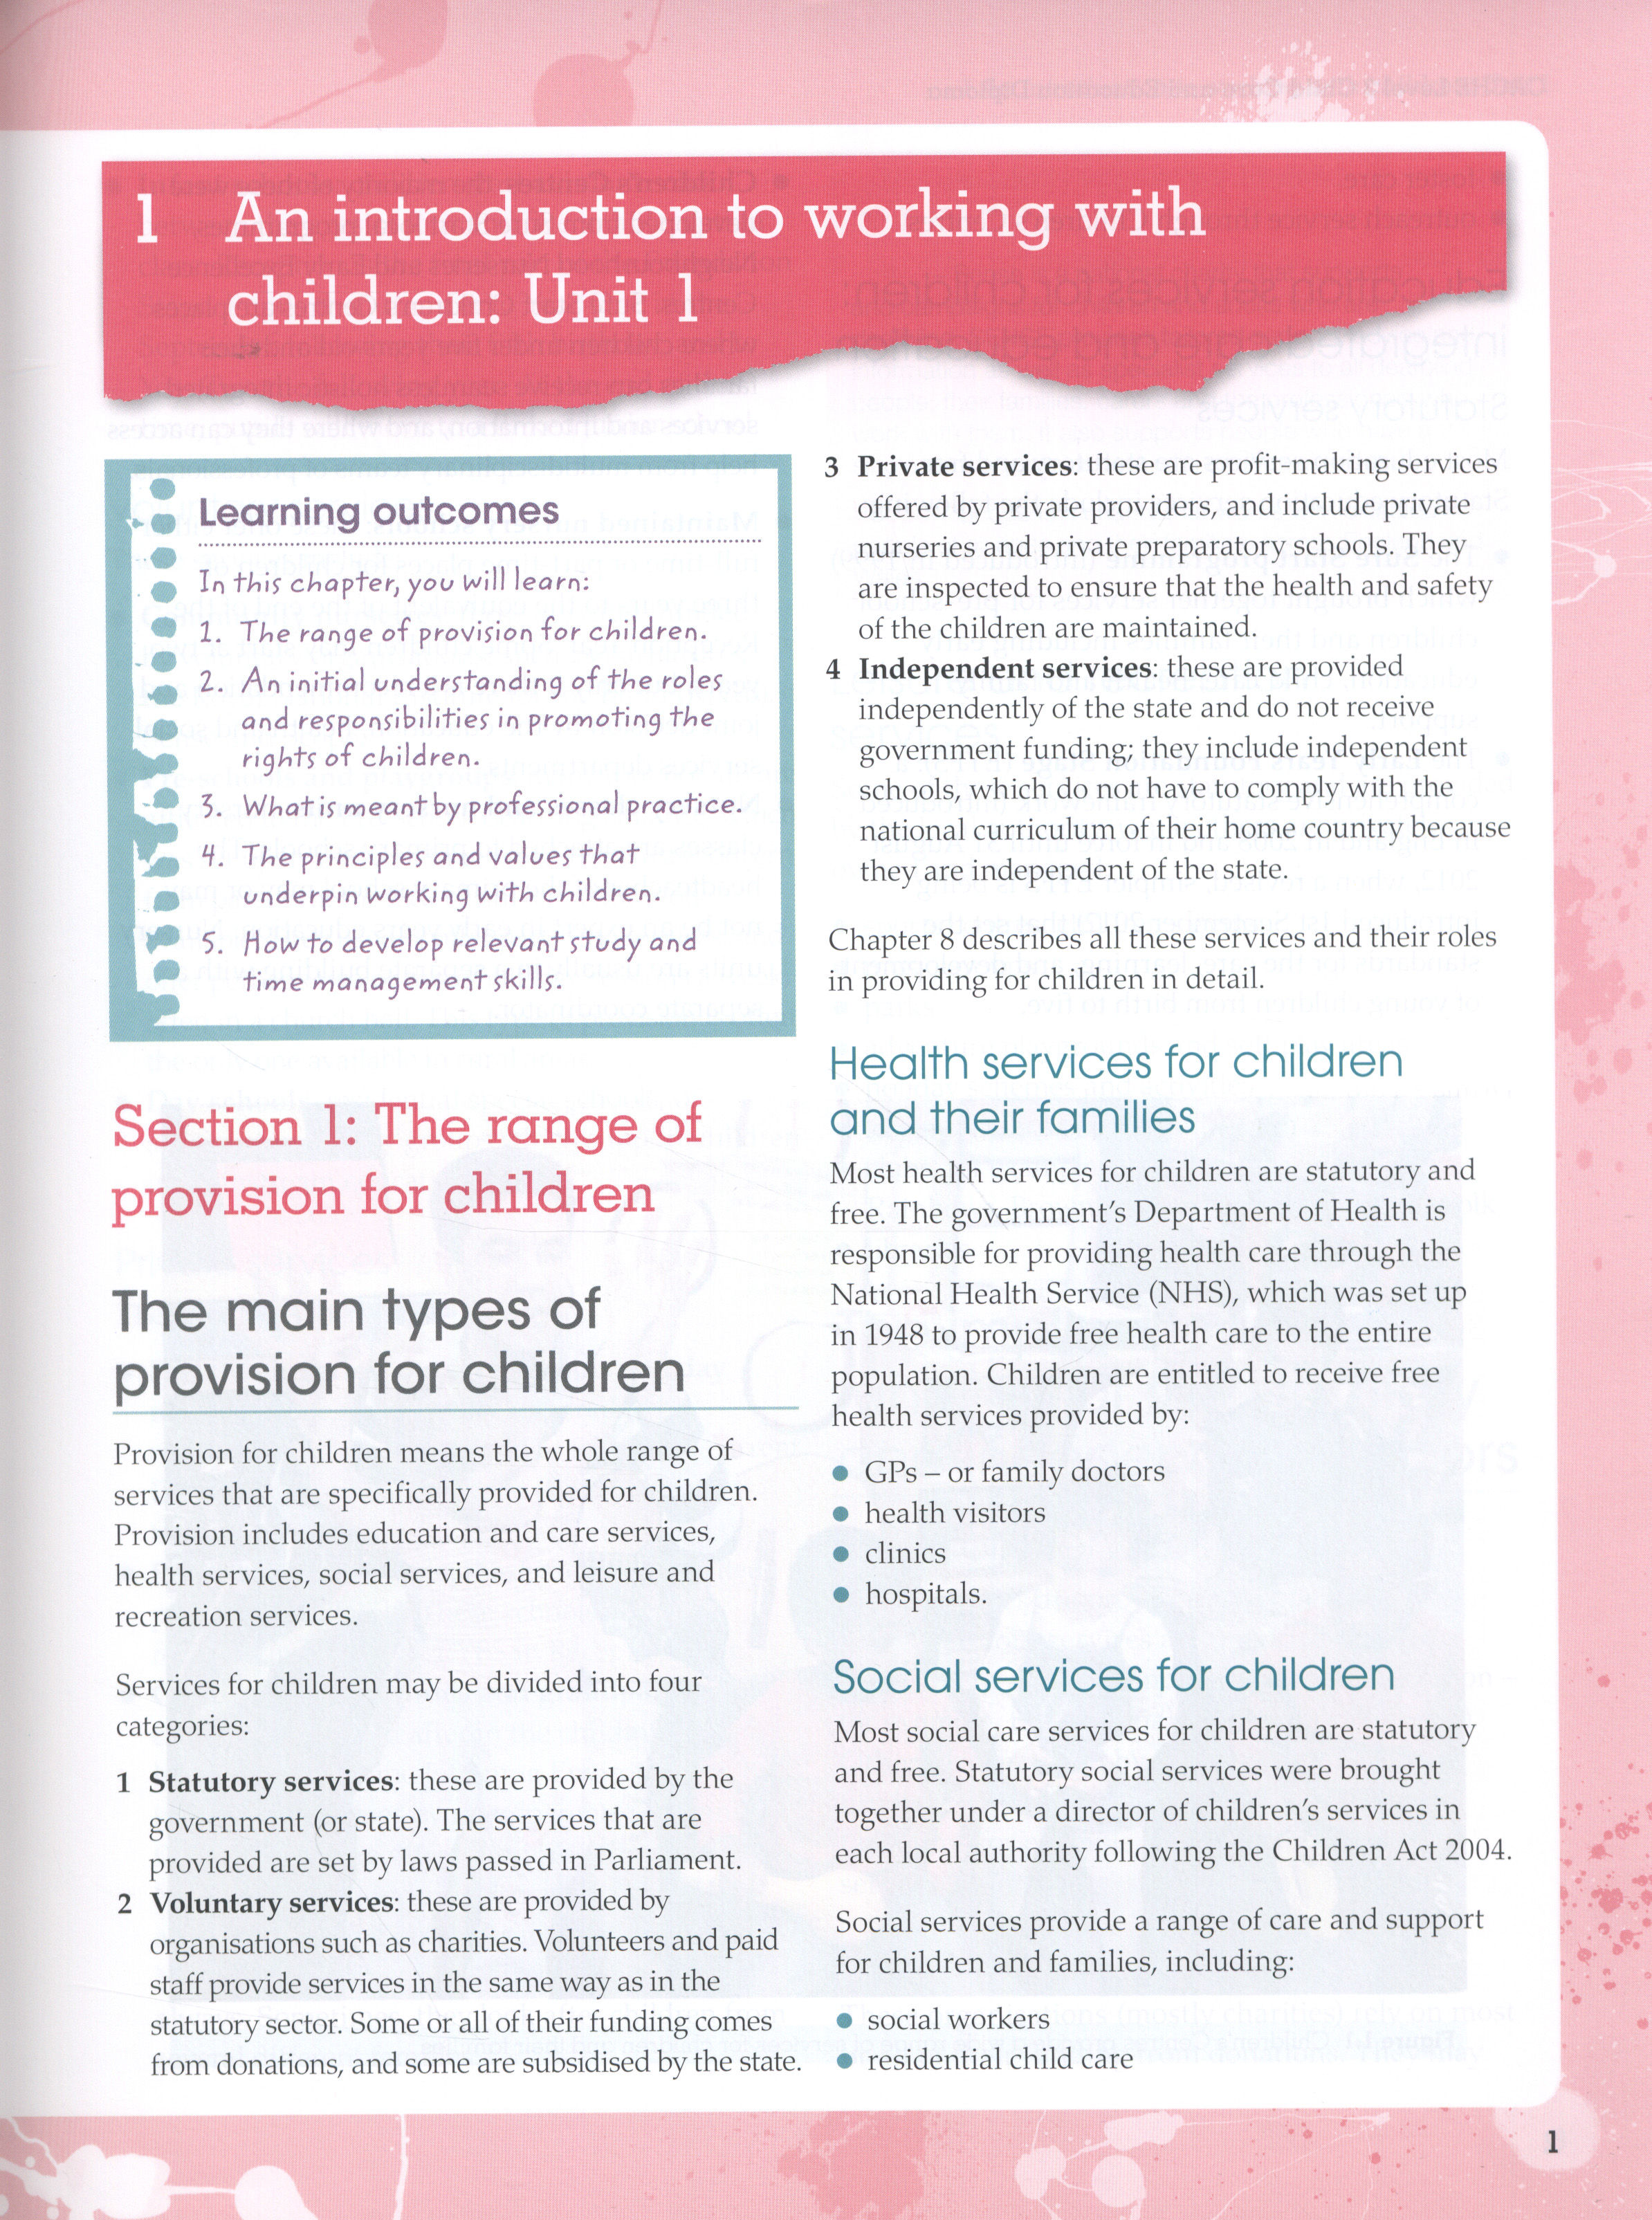 cache childcare level 3 assignment guidance